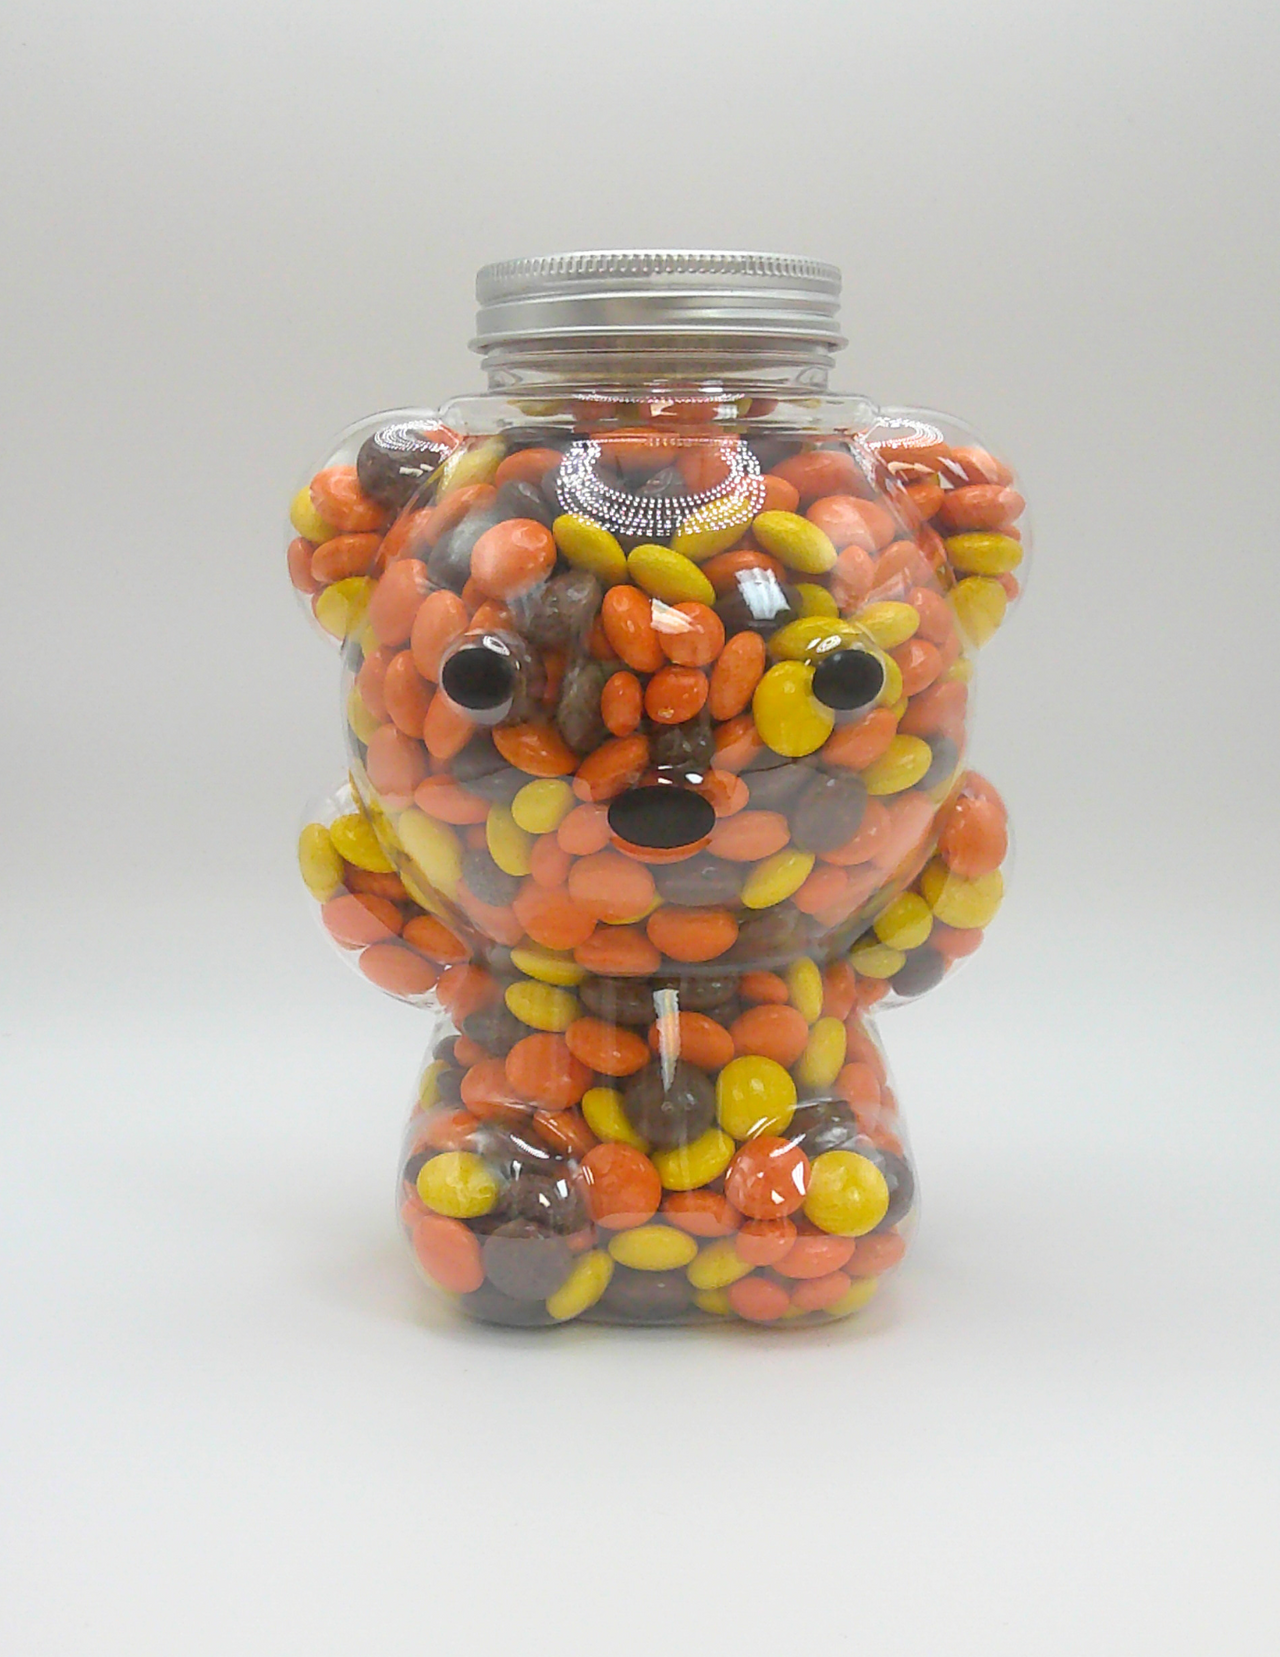 Jar of Reese's Pieces